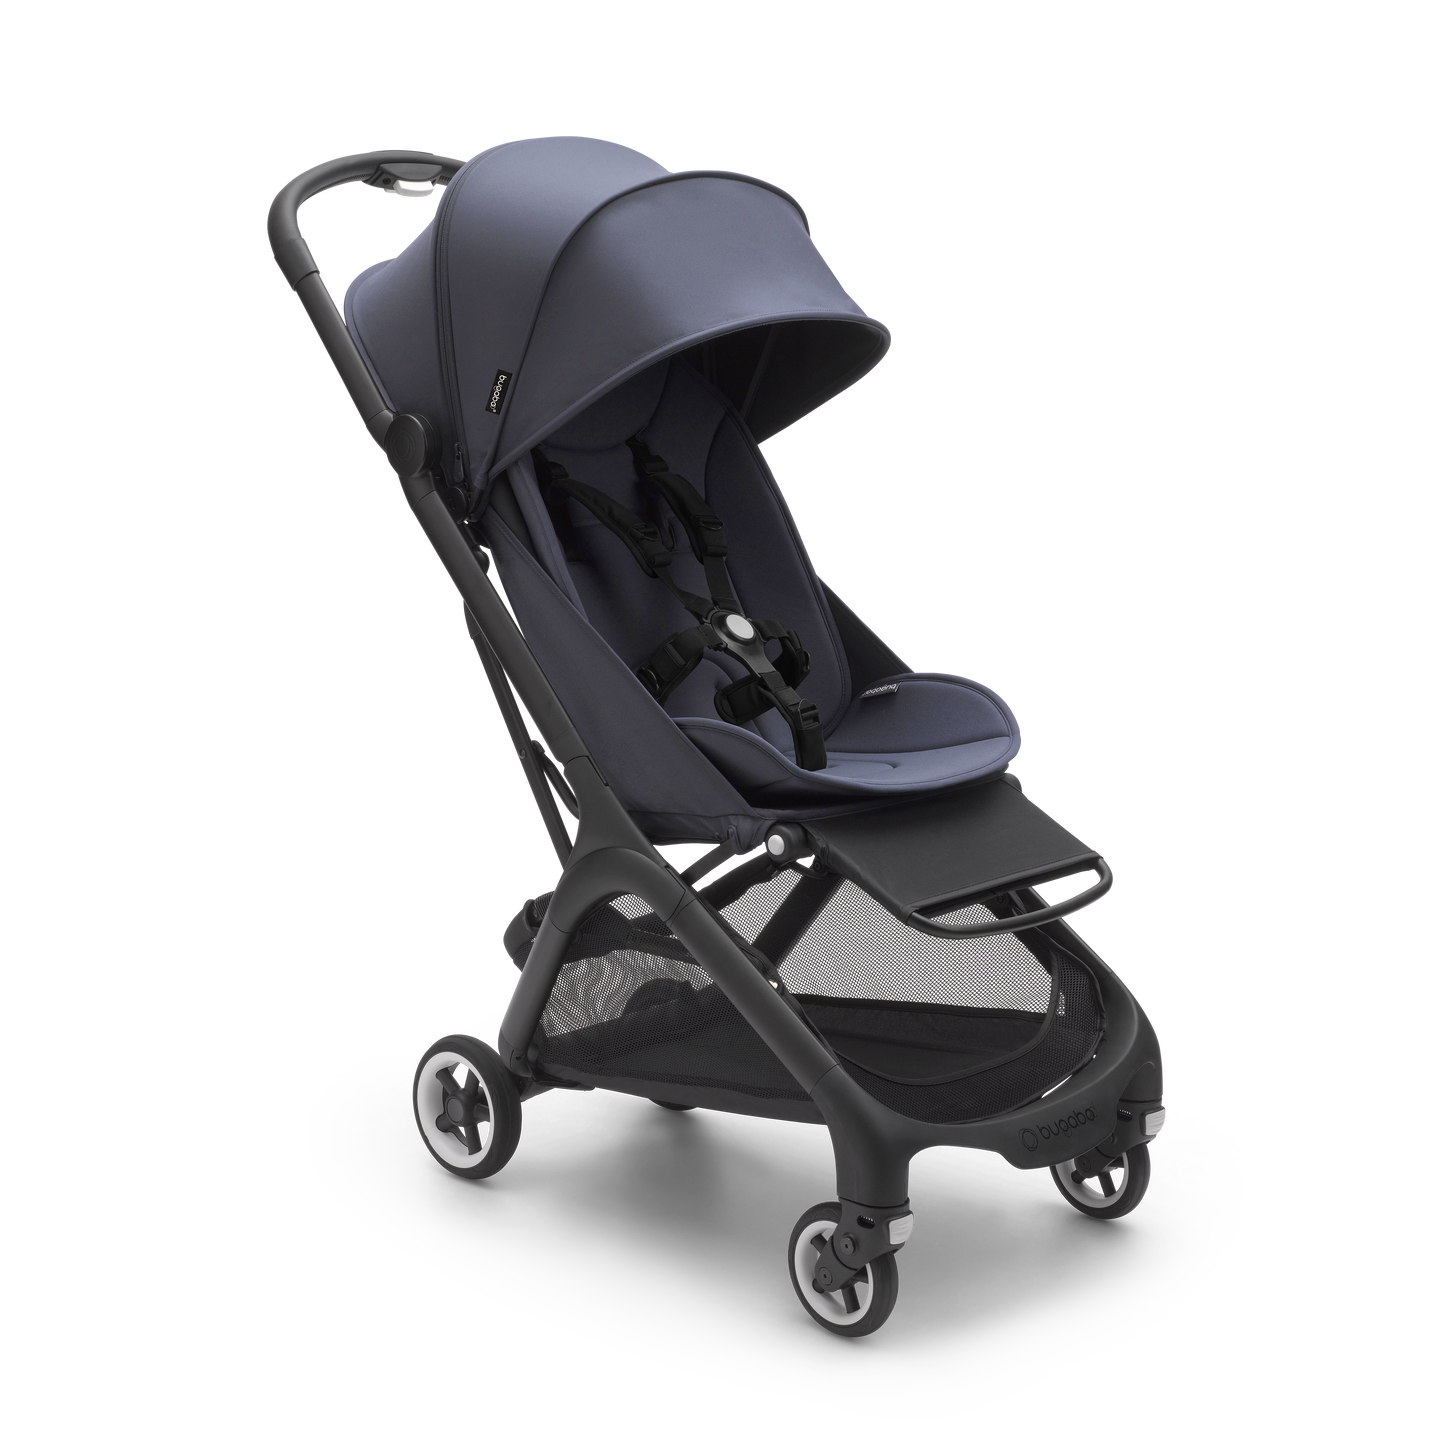 100 Day Free Trial on selected strollers | Bugaboo US | Bugaboo